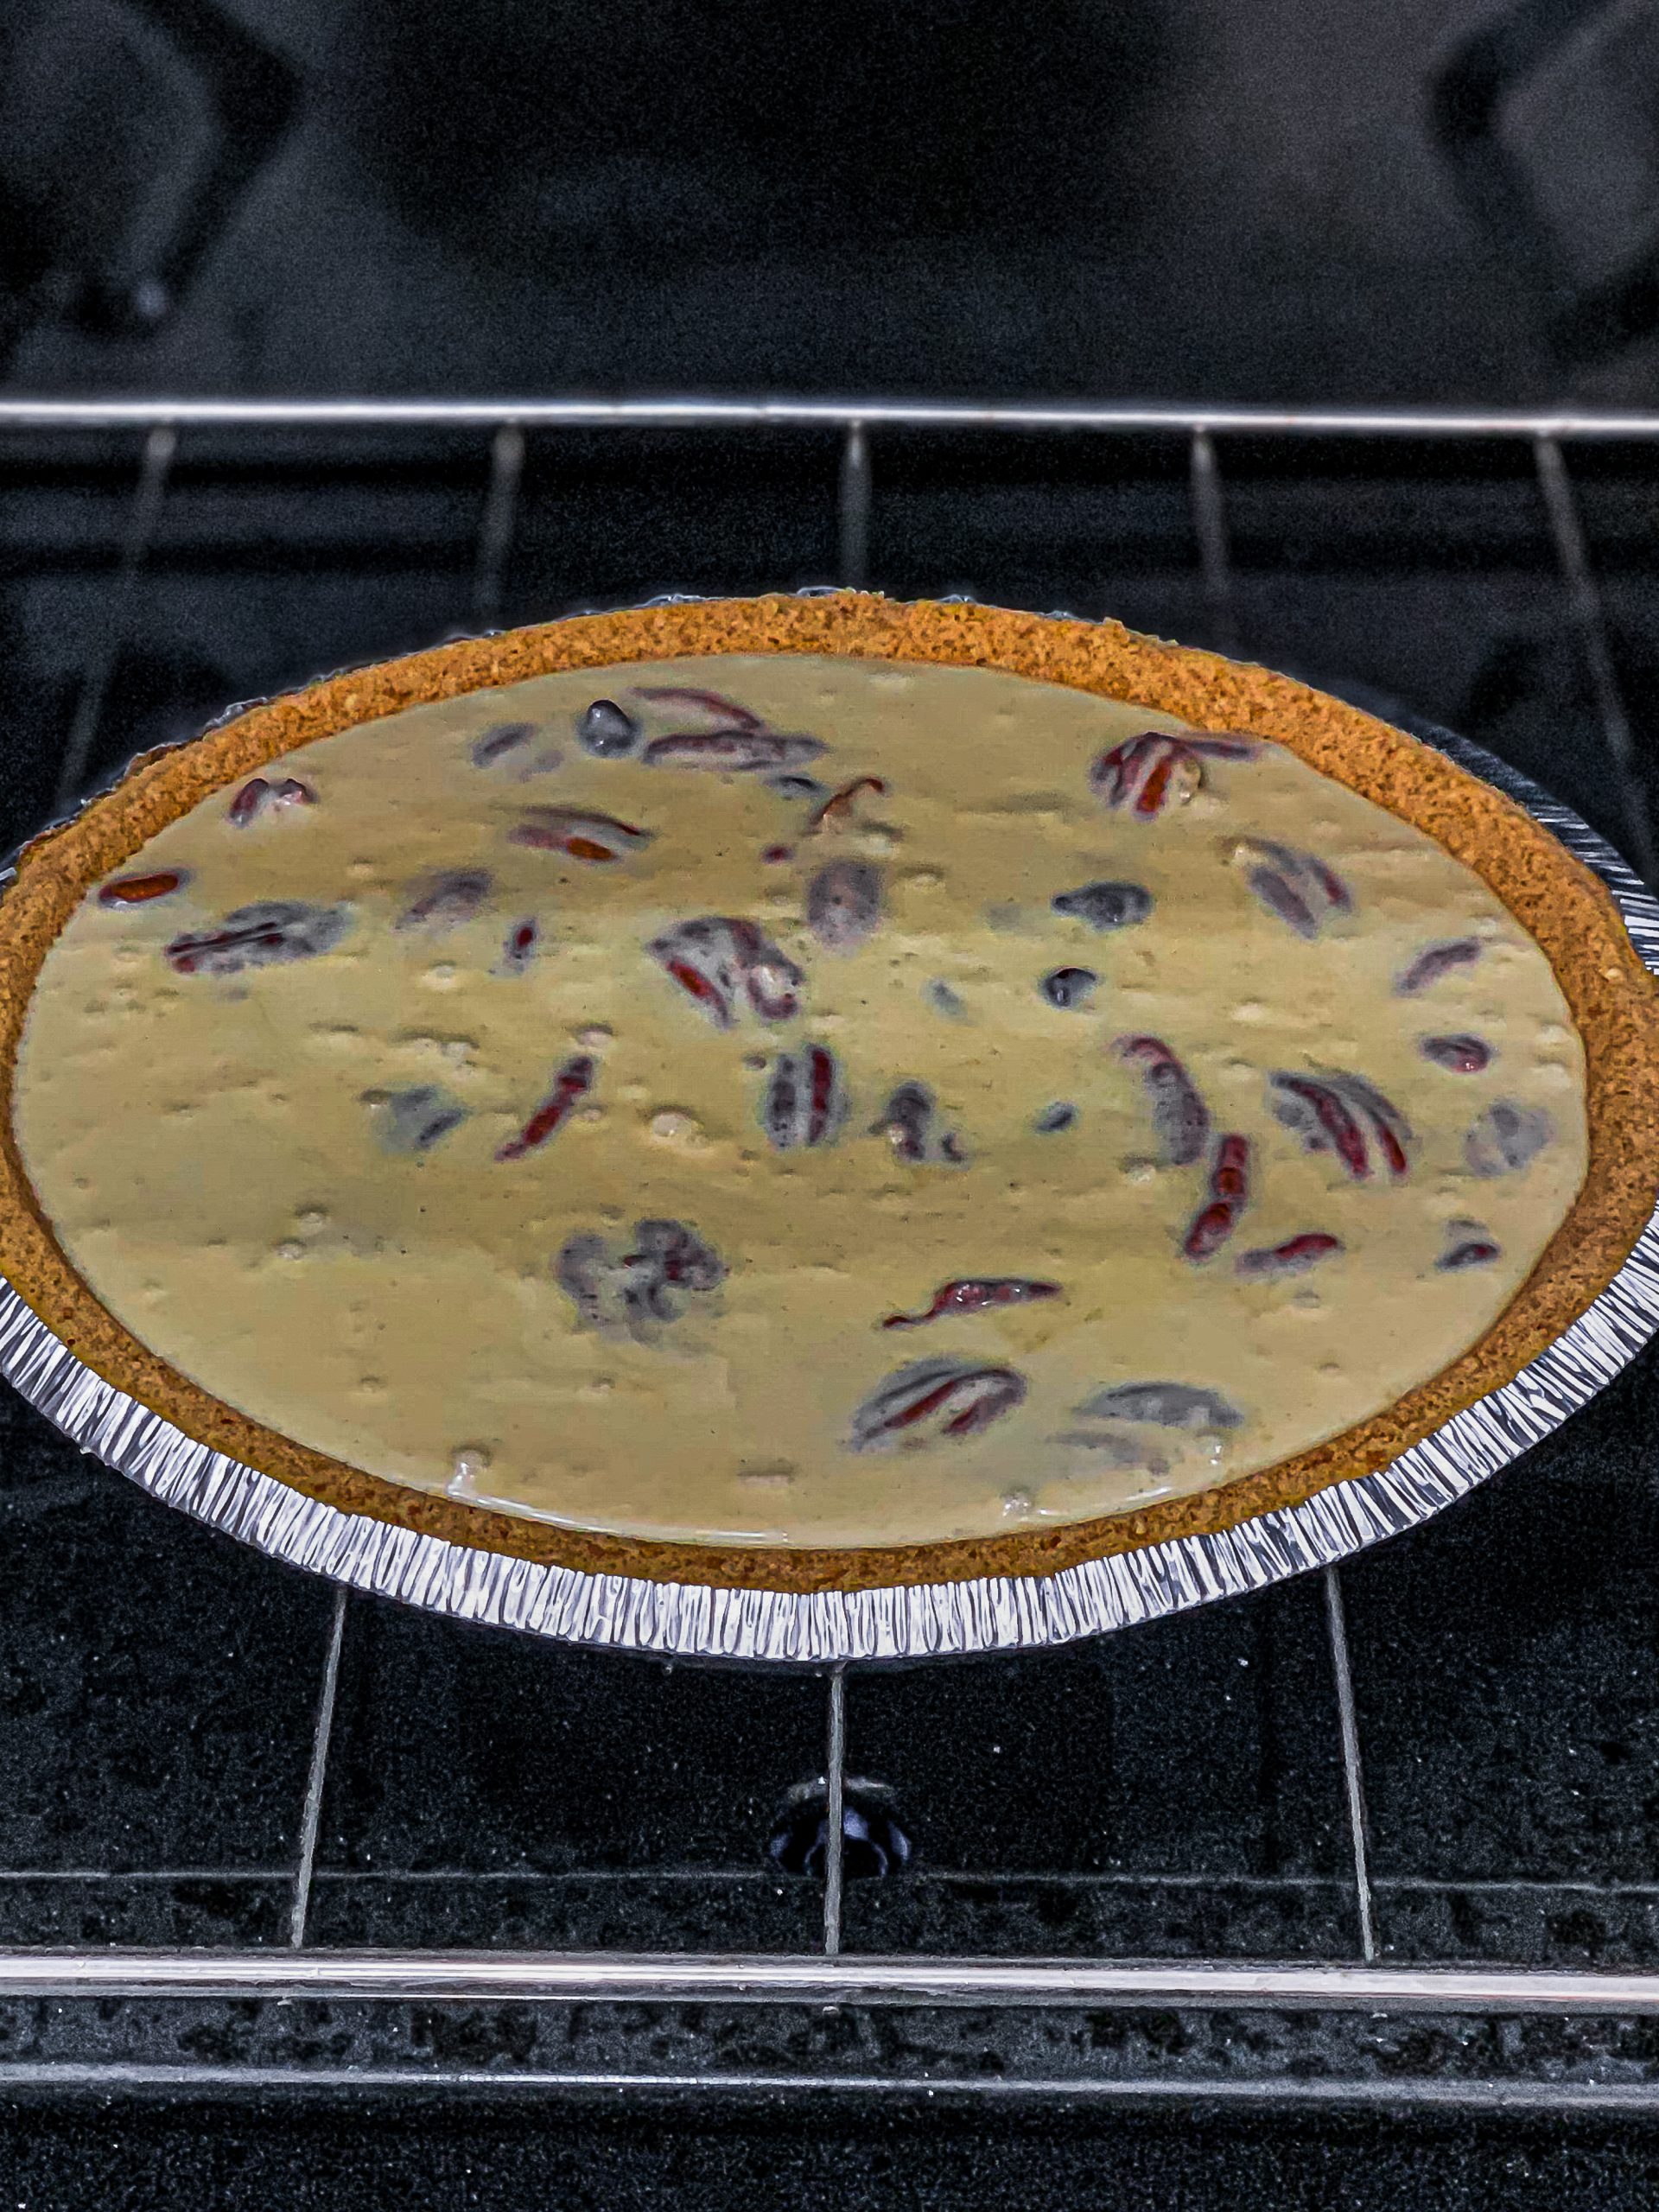 Place the pie into the oven and bake at 350° F / 175° C for about 40-45 minutes until set.